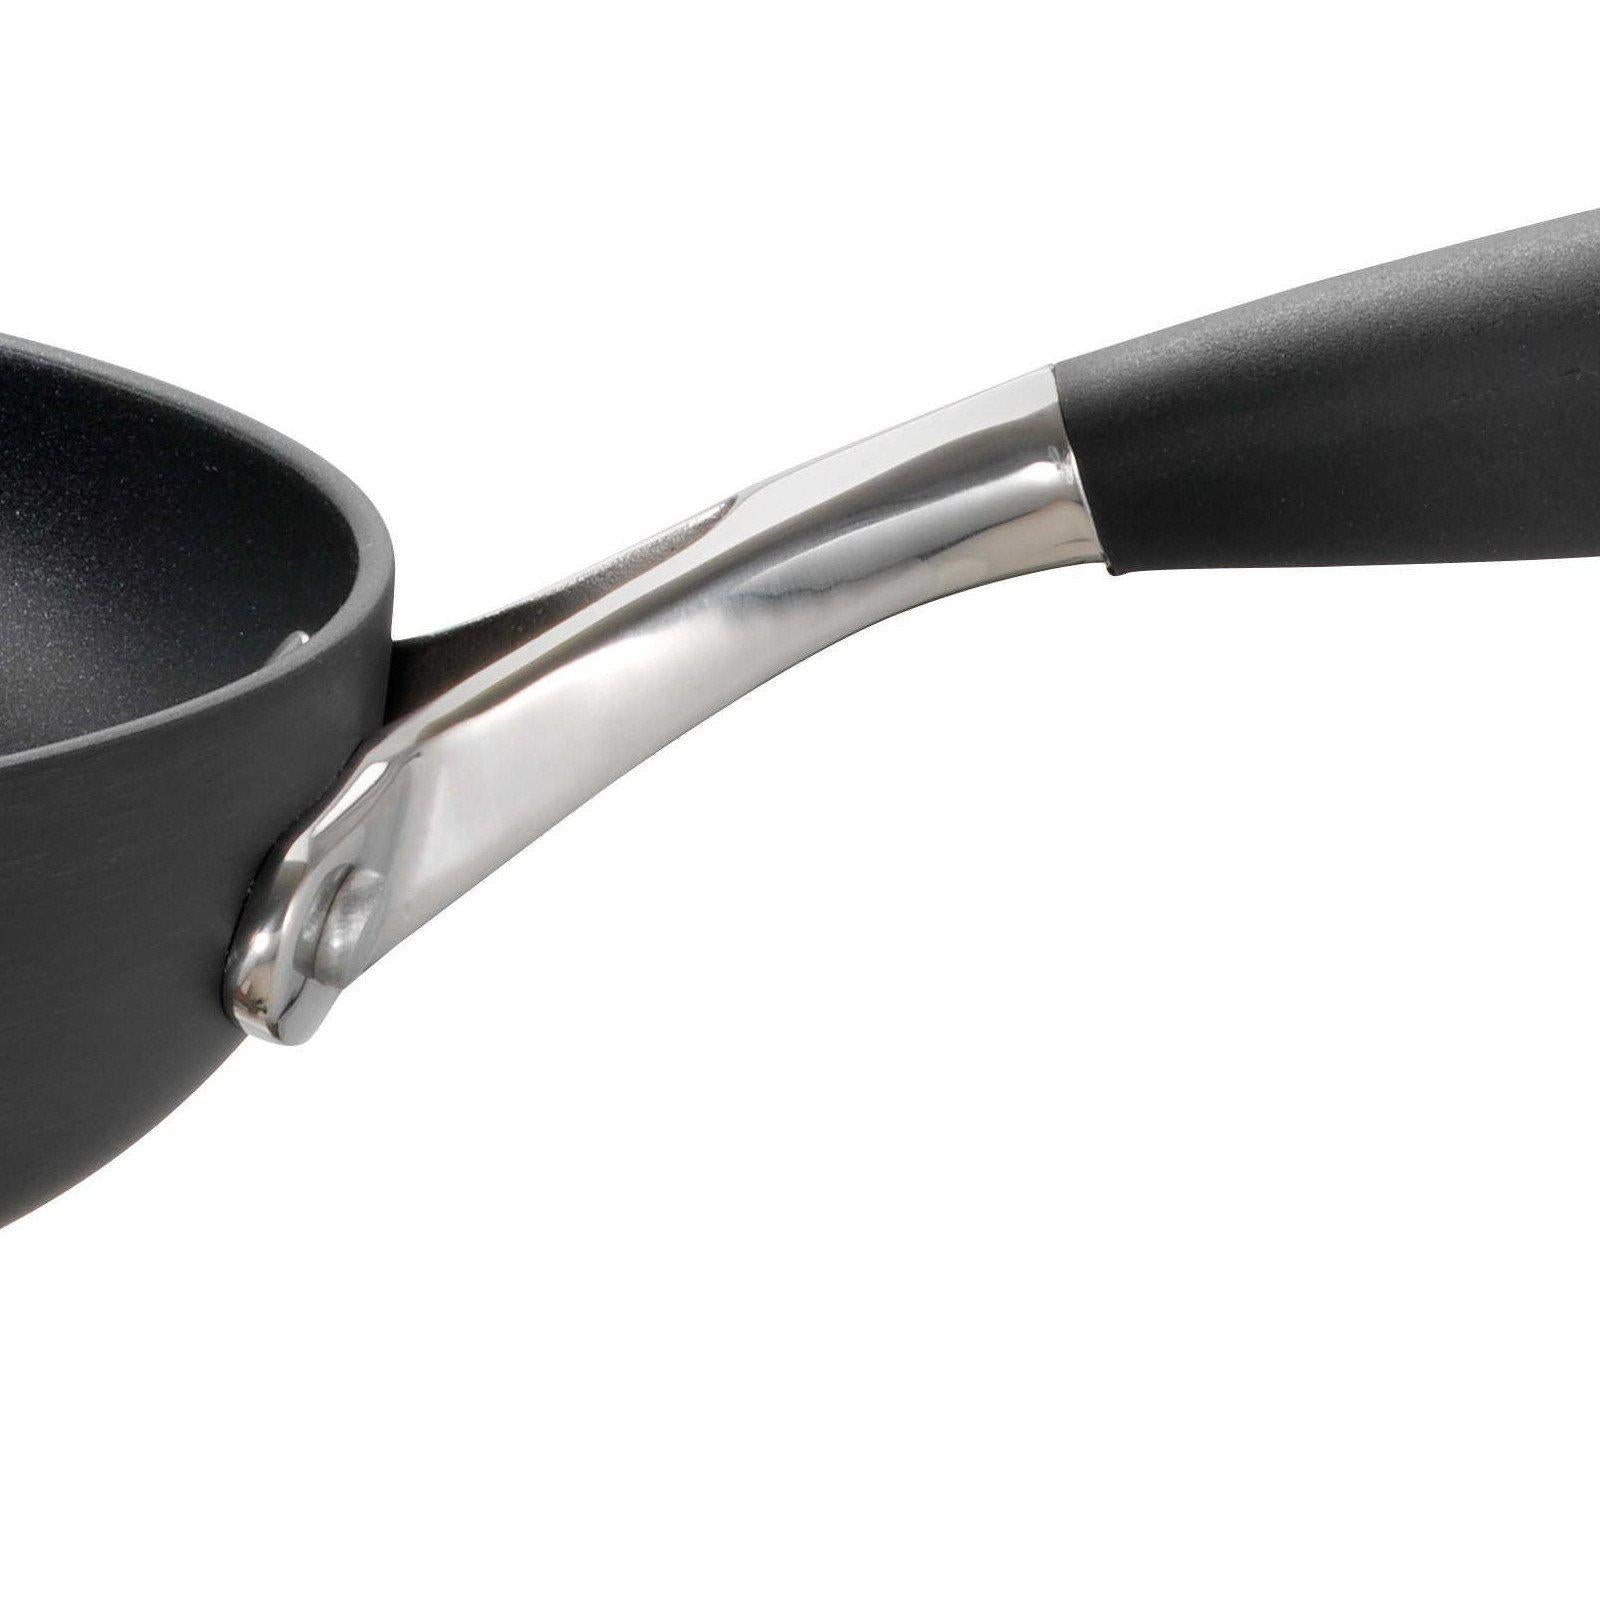 Blinq Elite 24CM Frypan - Nonstick Hard Anodised-Cookware Set-Chef's Quality Cookware